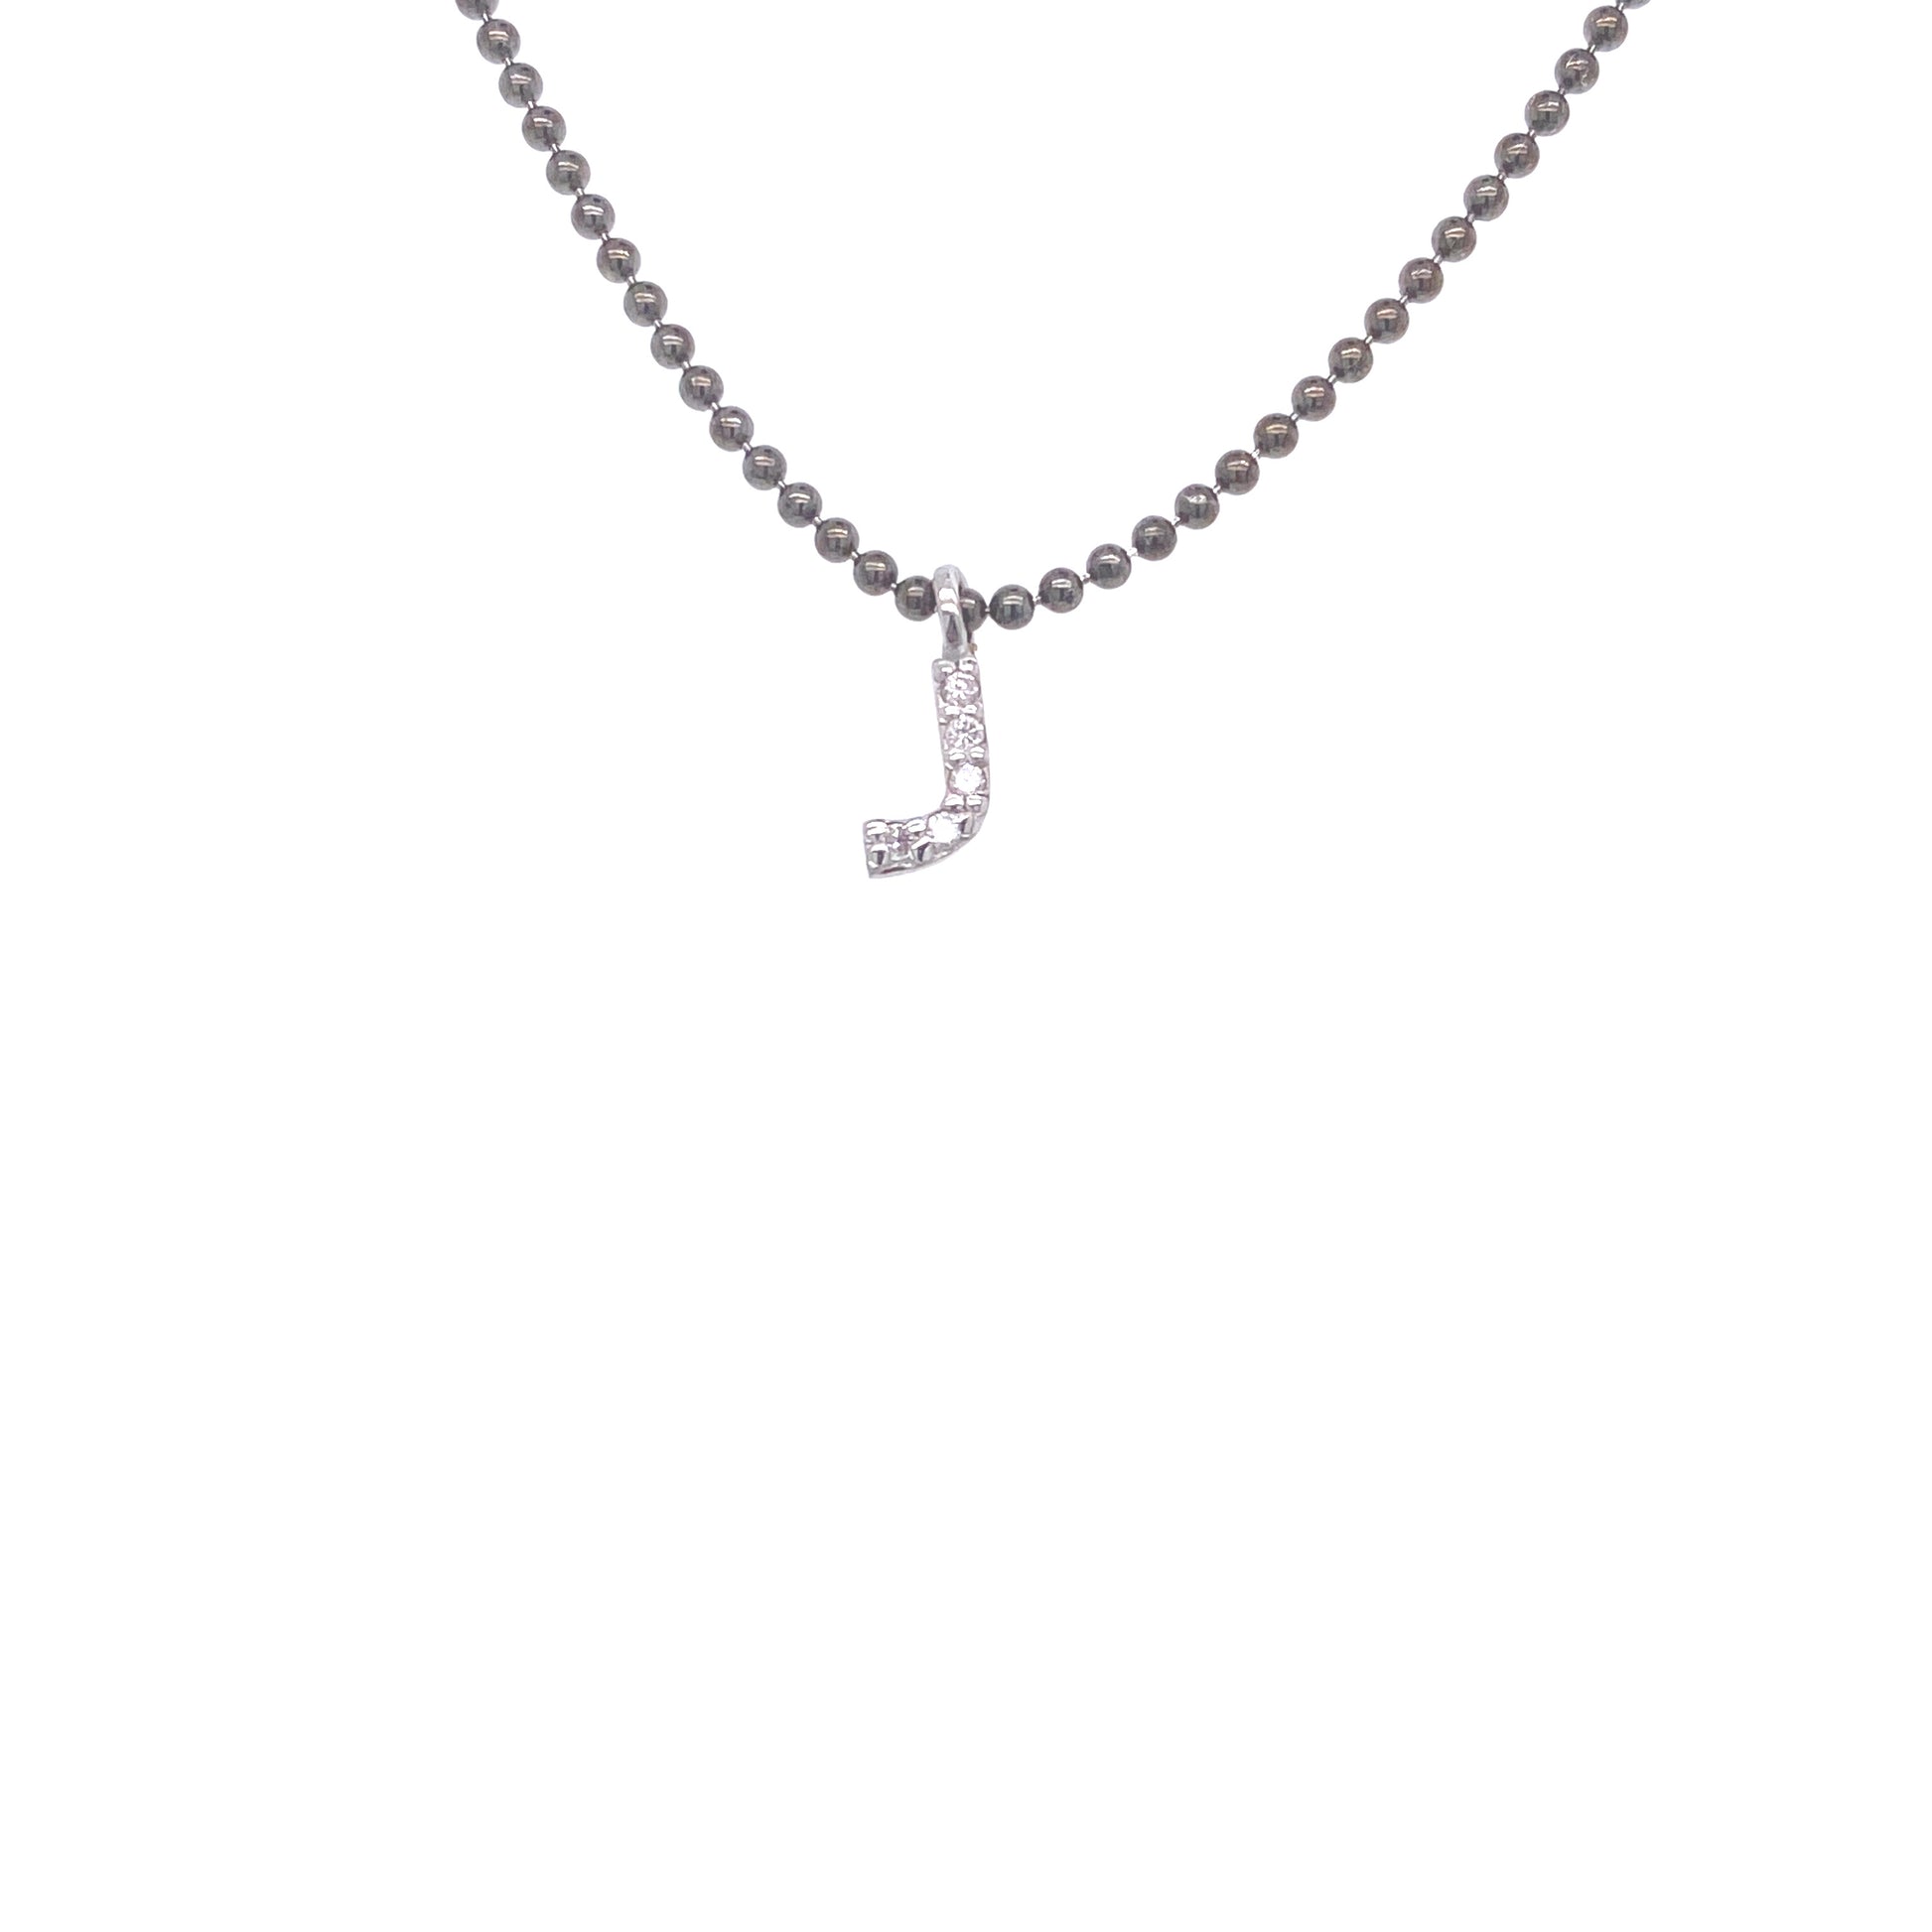 Necklace With Small Initial J and Diamond | Bernat Rubi | Luby 